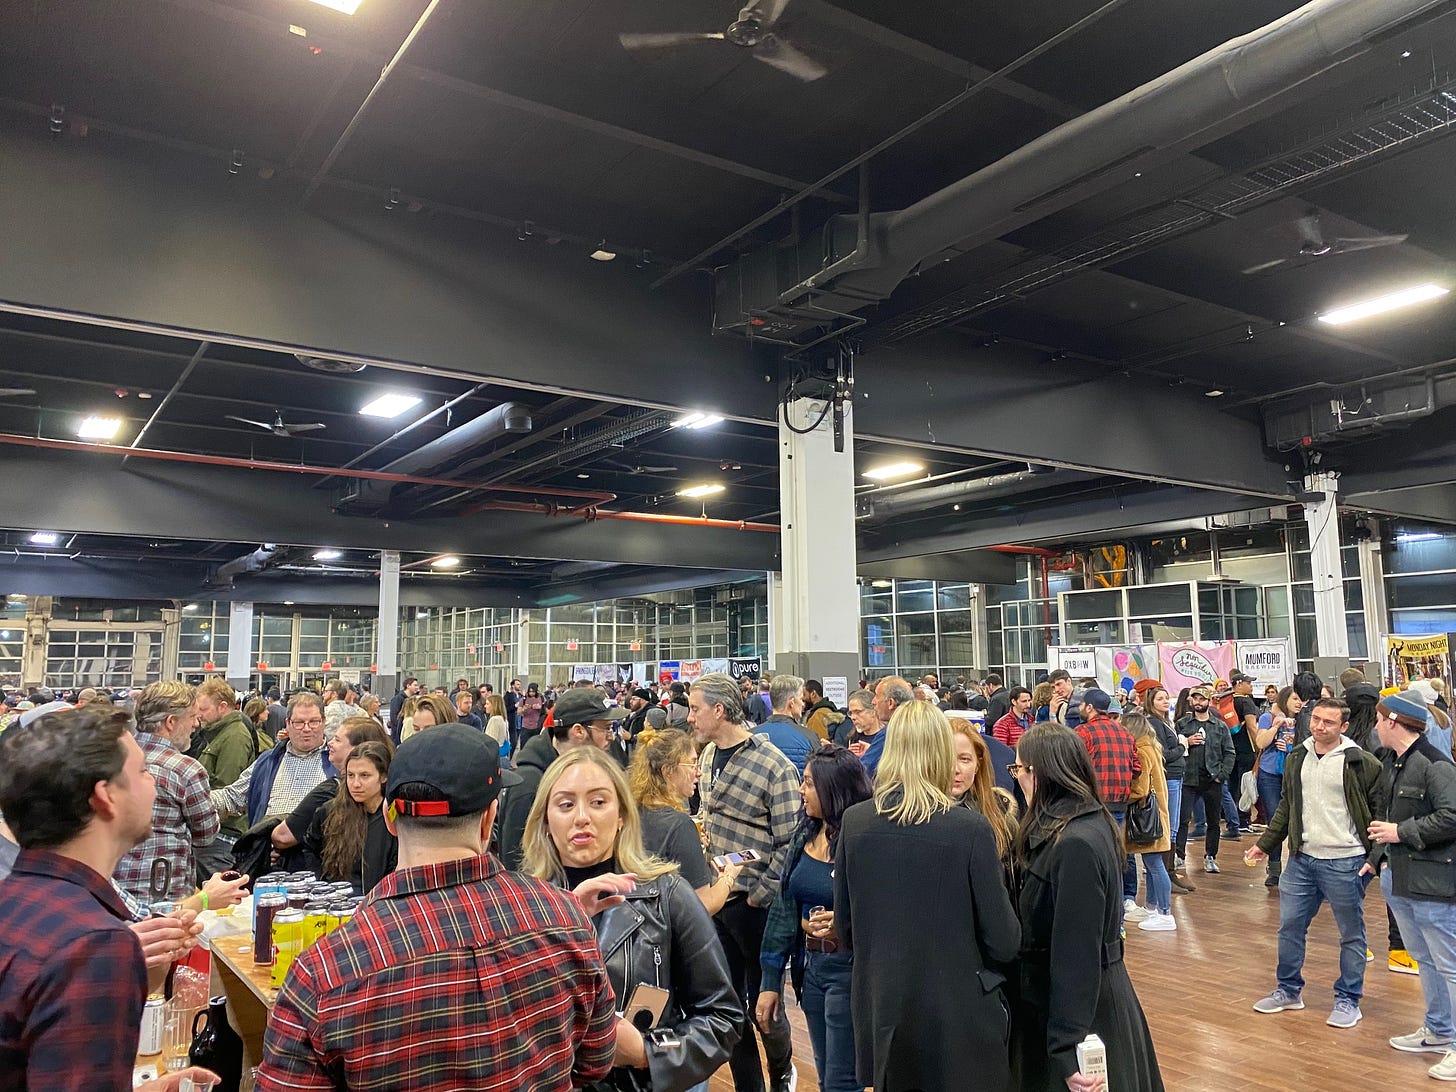 Several hundred people gathered indoors at a beer festival before the pandemic